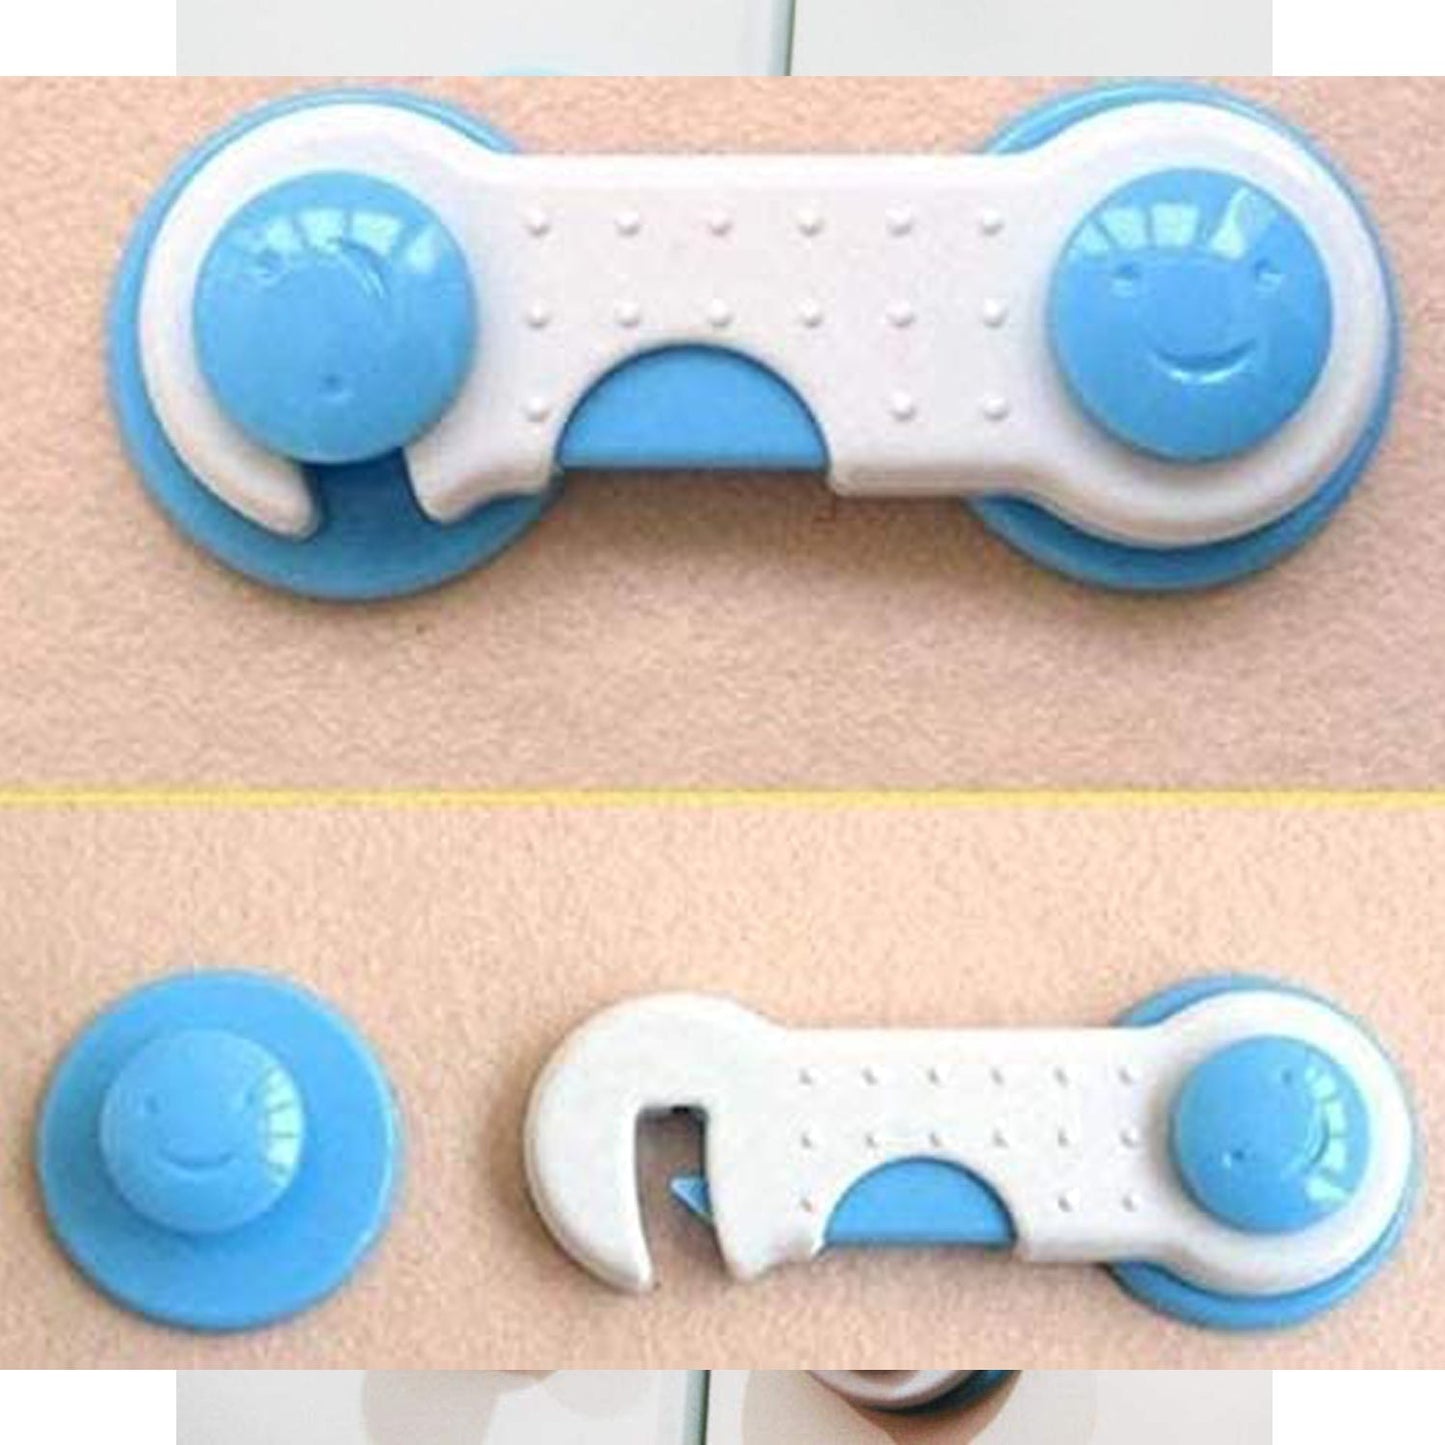 4688A Child Safety lock Child Toddler Baby Safety Locks Proofing for Cabinet Toilet Seat Fridge Door Drawers ( 1 pc) Dukandaily